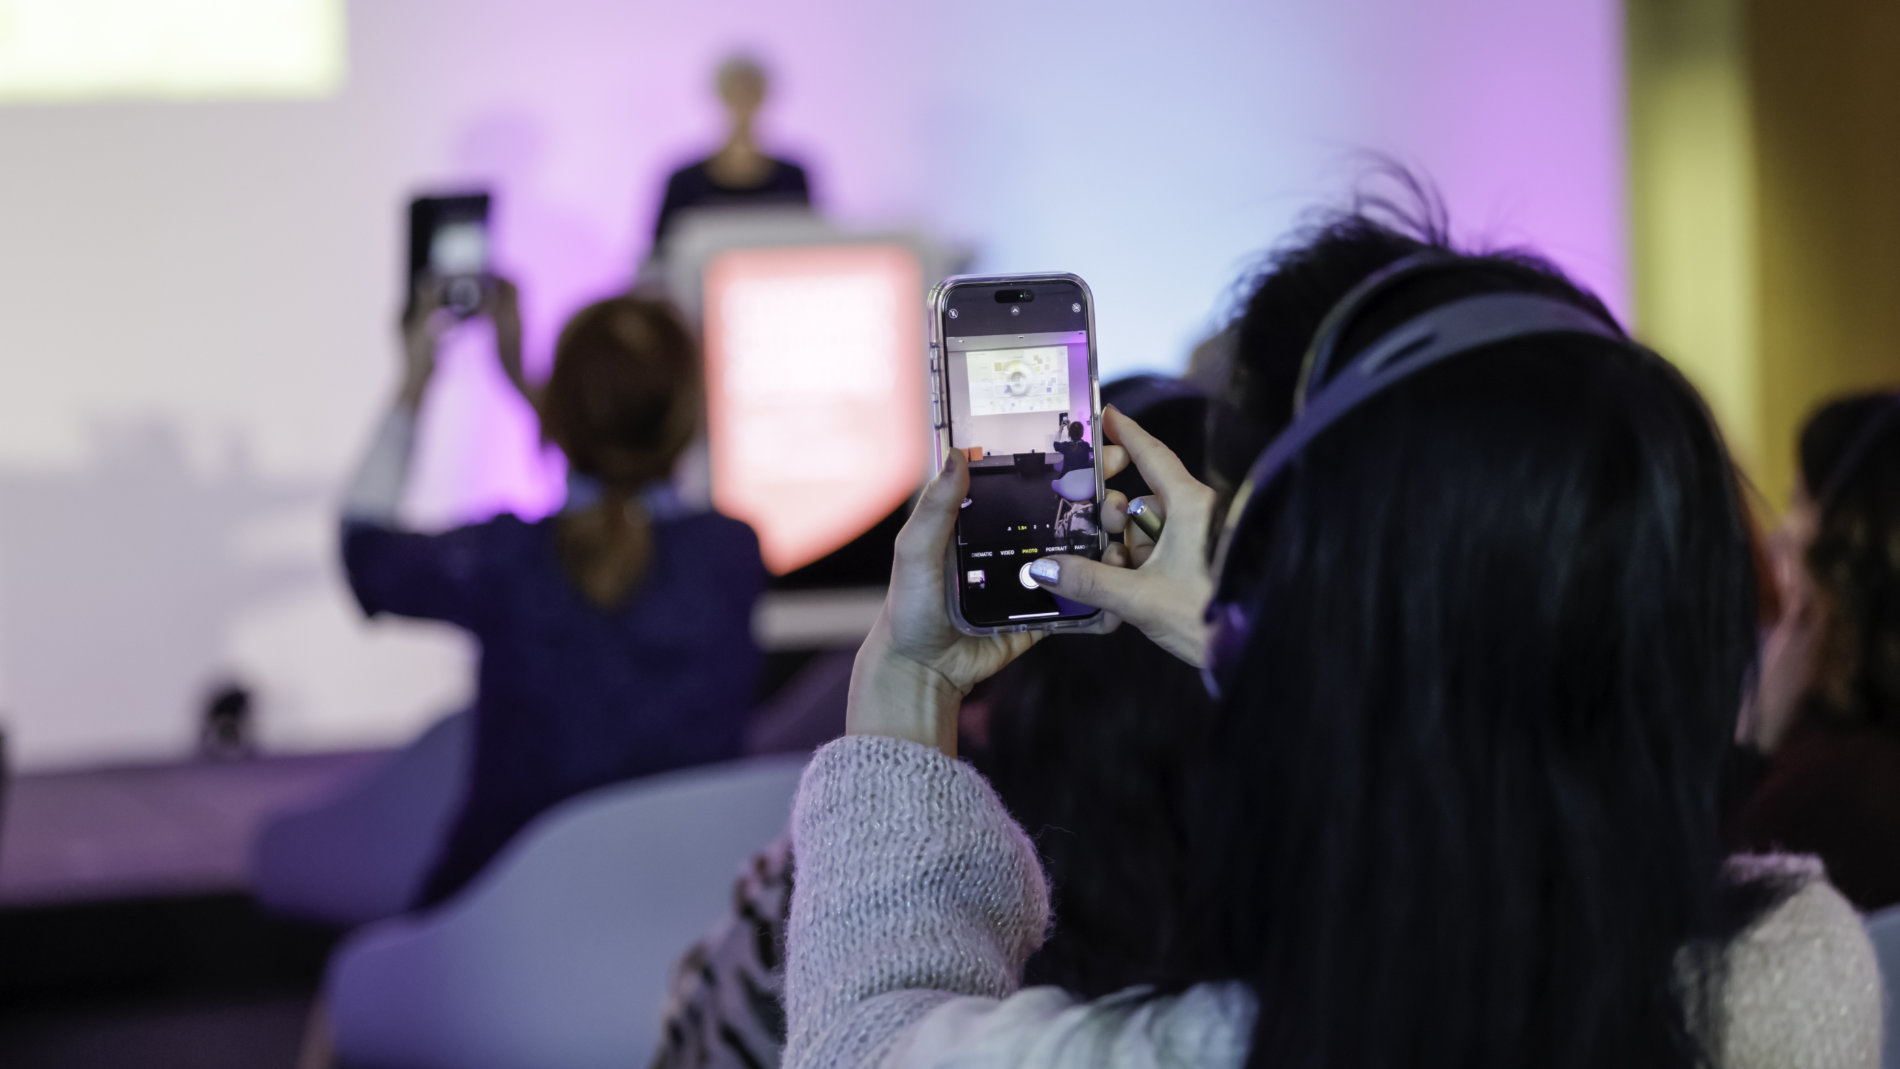 Visitors to a lecture take photos with their smartphones